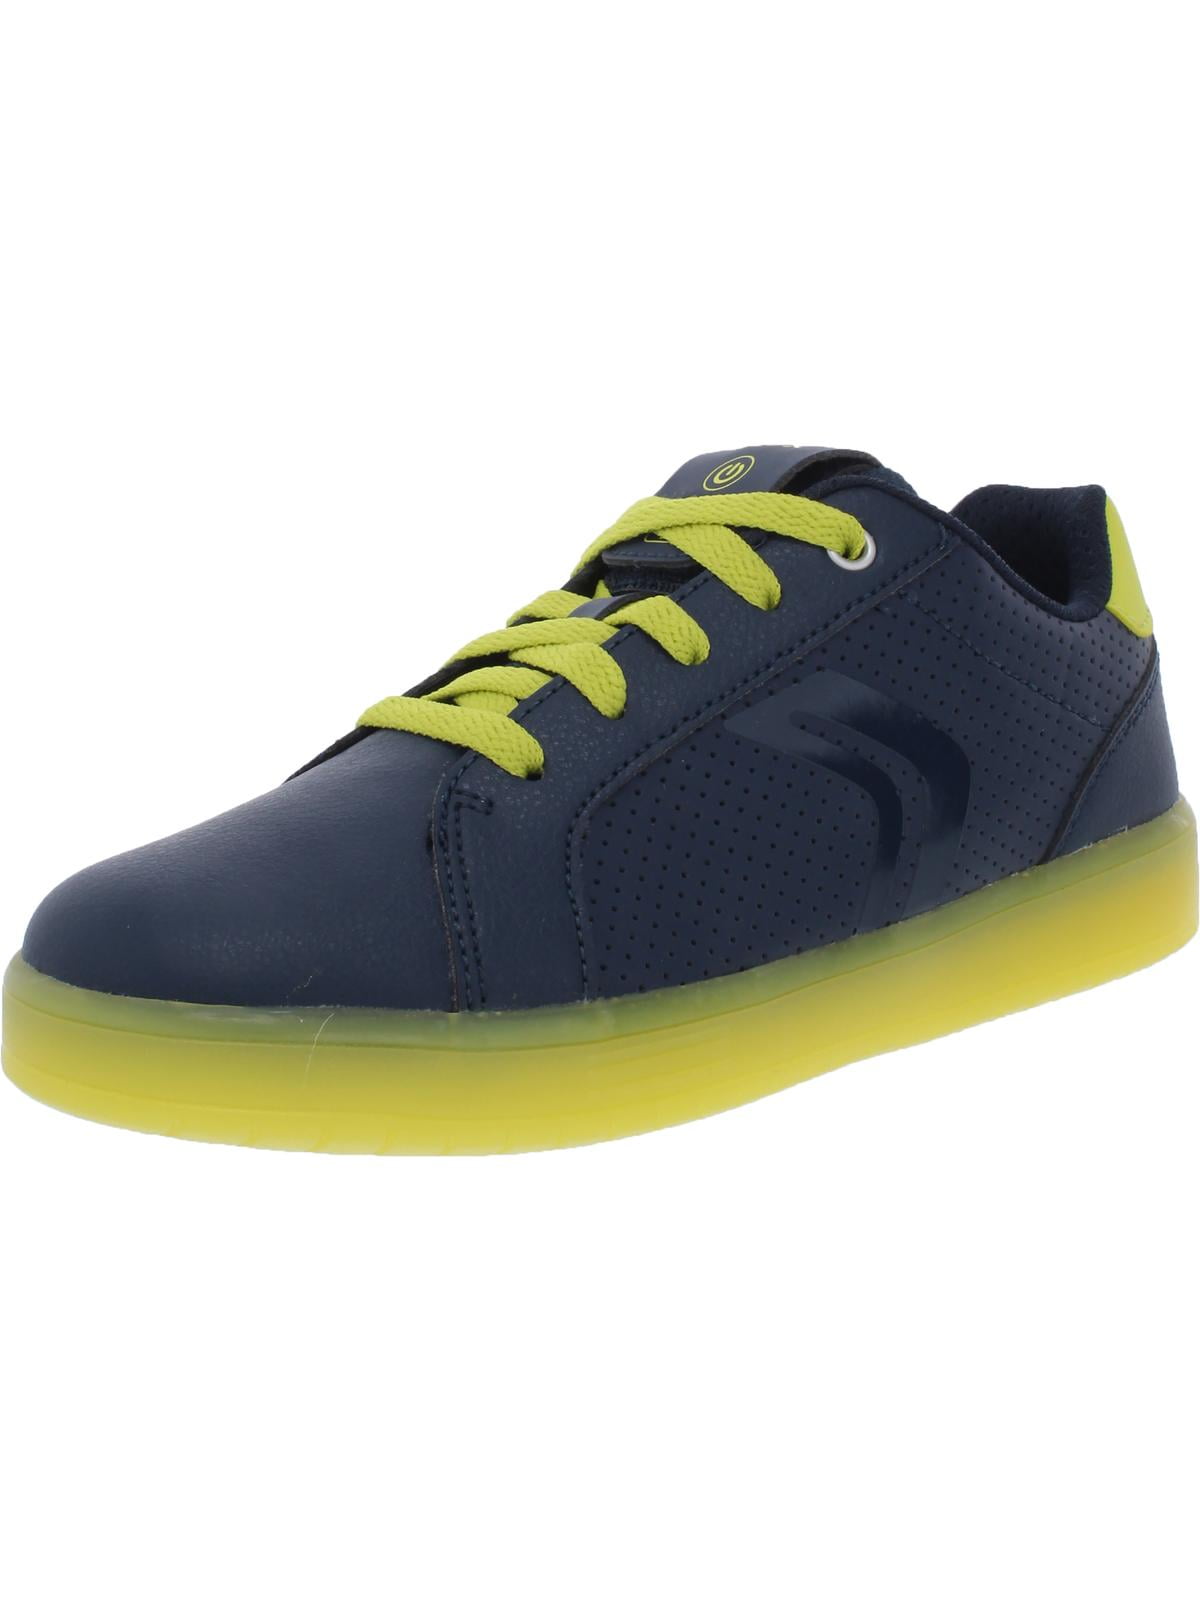 Geox Junior Kommodor Light-Up Boy's Trainers Black/Lime 50% OFF RRP 